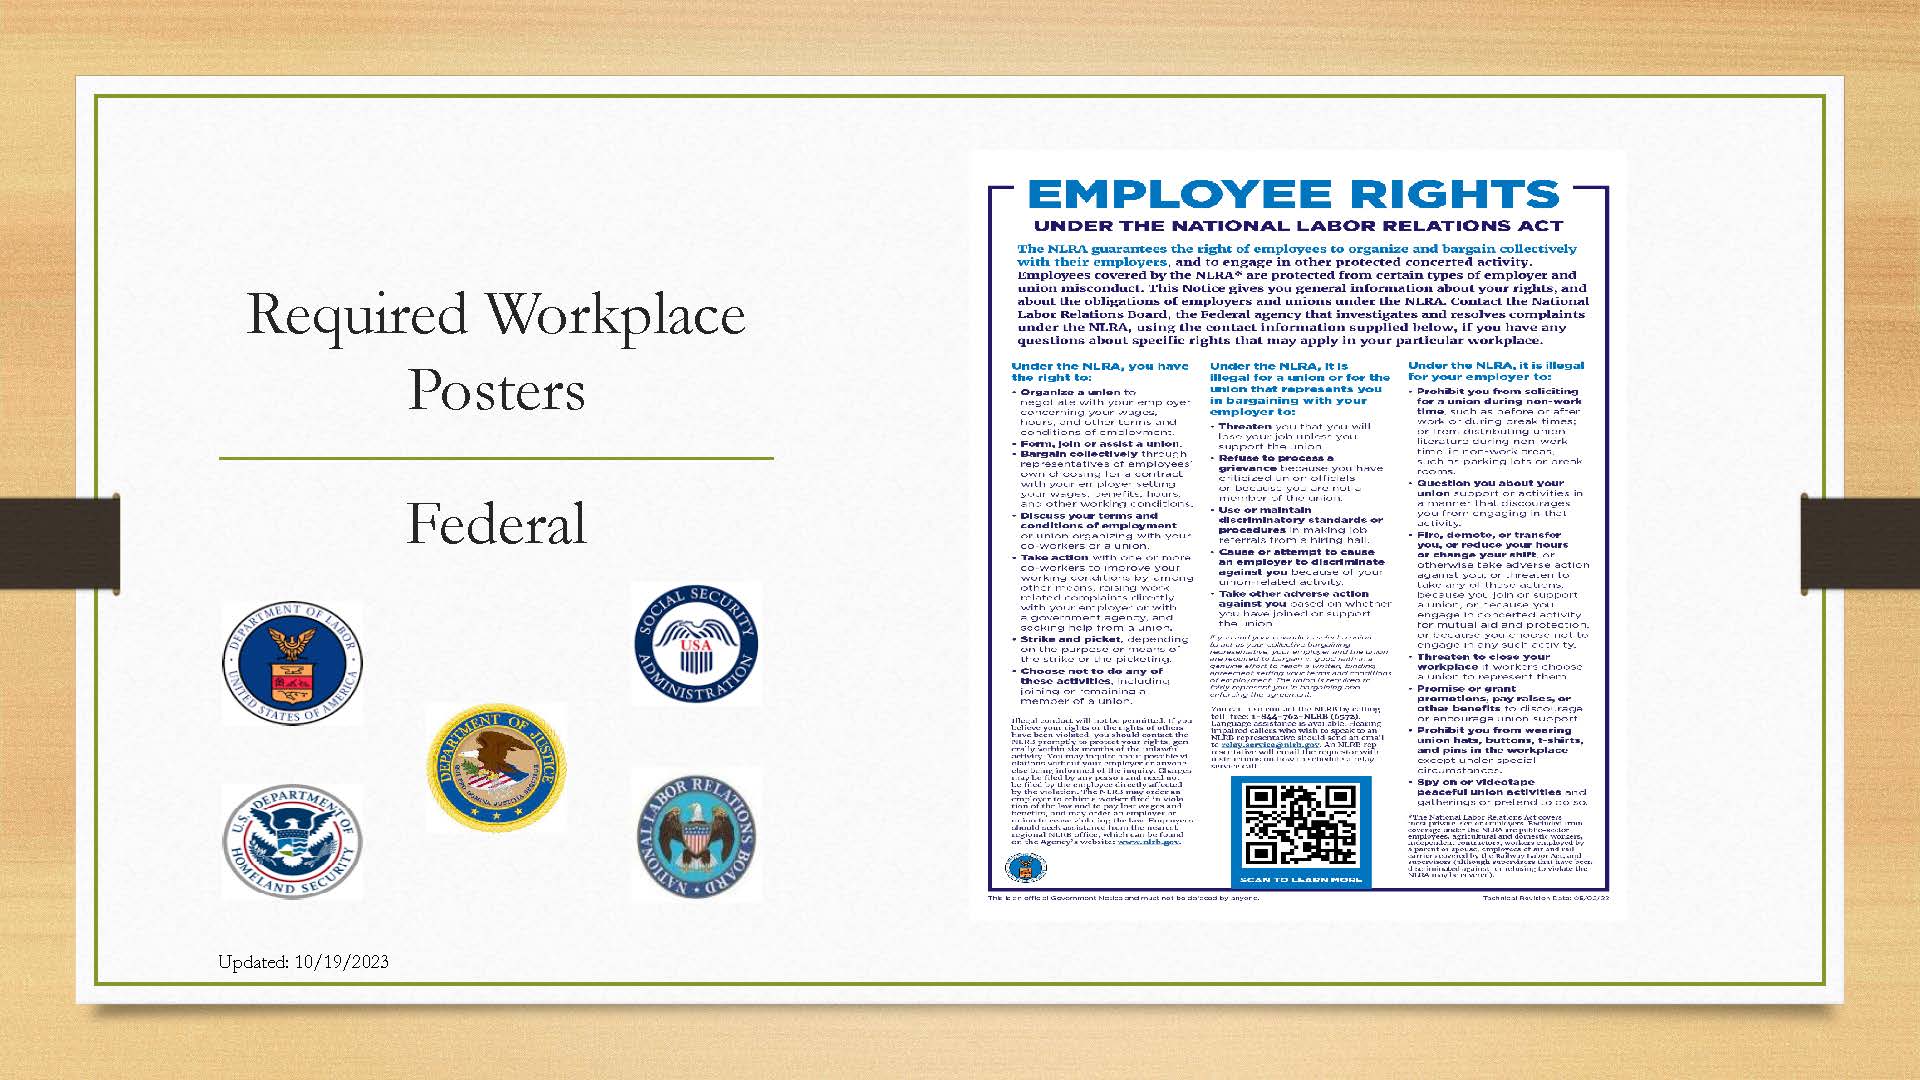 Federal Employee Rights Under the National Labor Relations Act poster